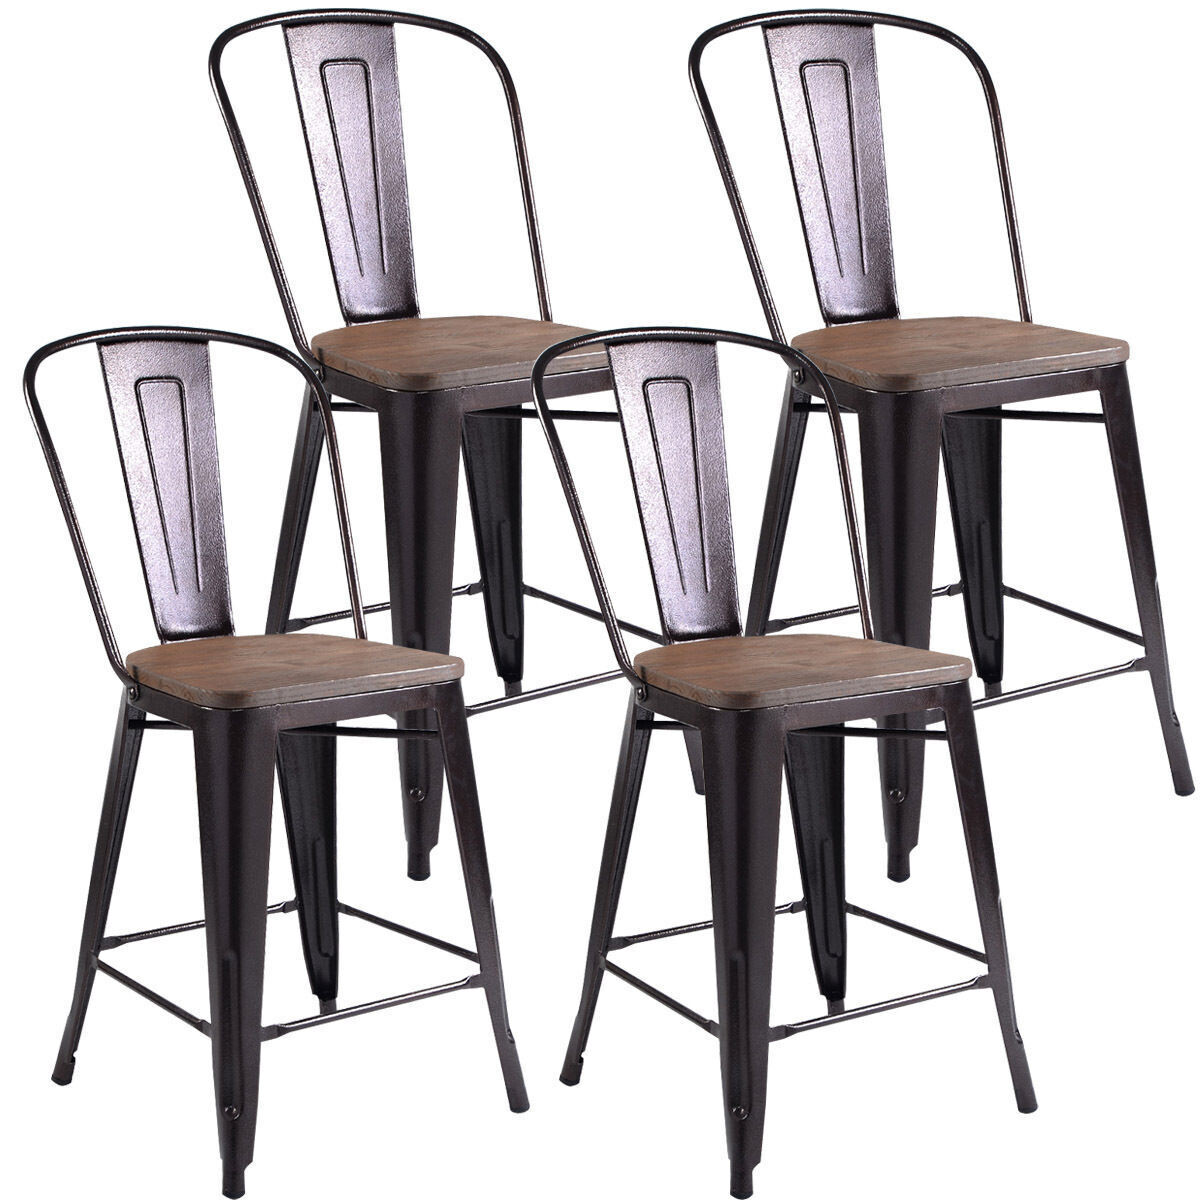 Set of 4 Industrial Metal Counter Stool Dining Chairs with Removable Backrests-Cooper - Color: Brown